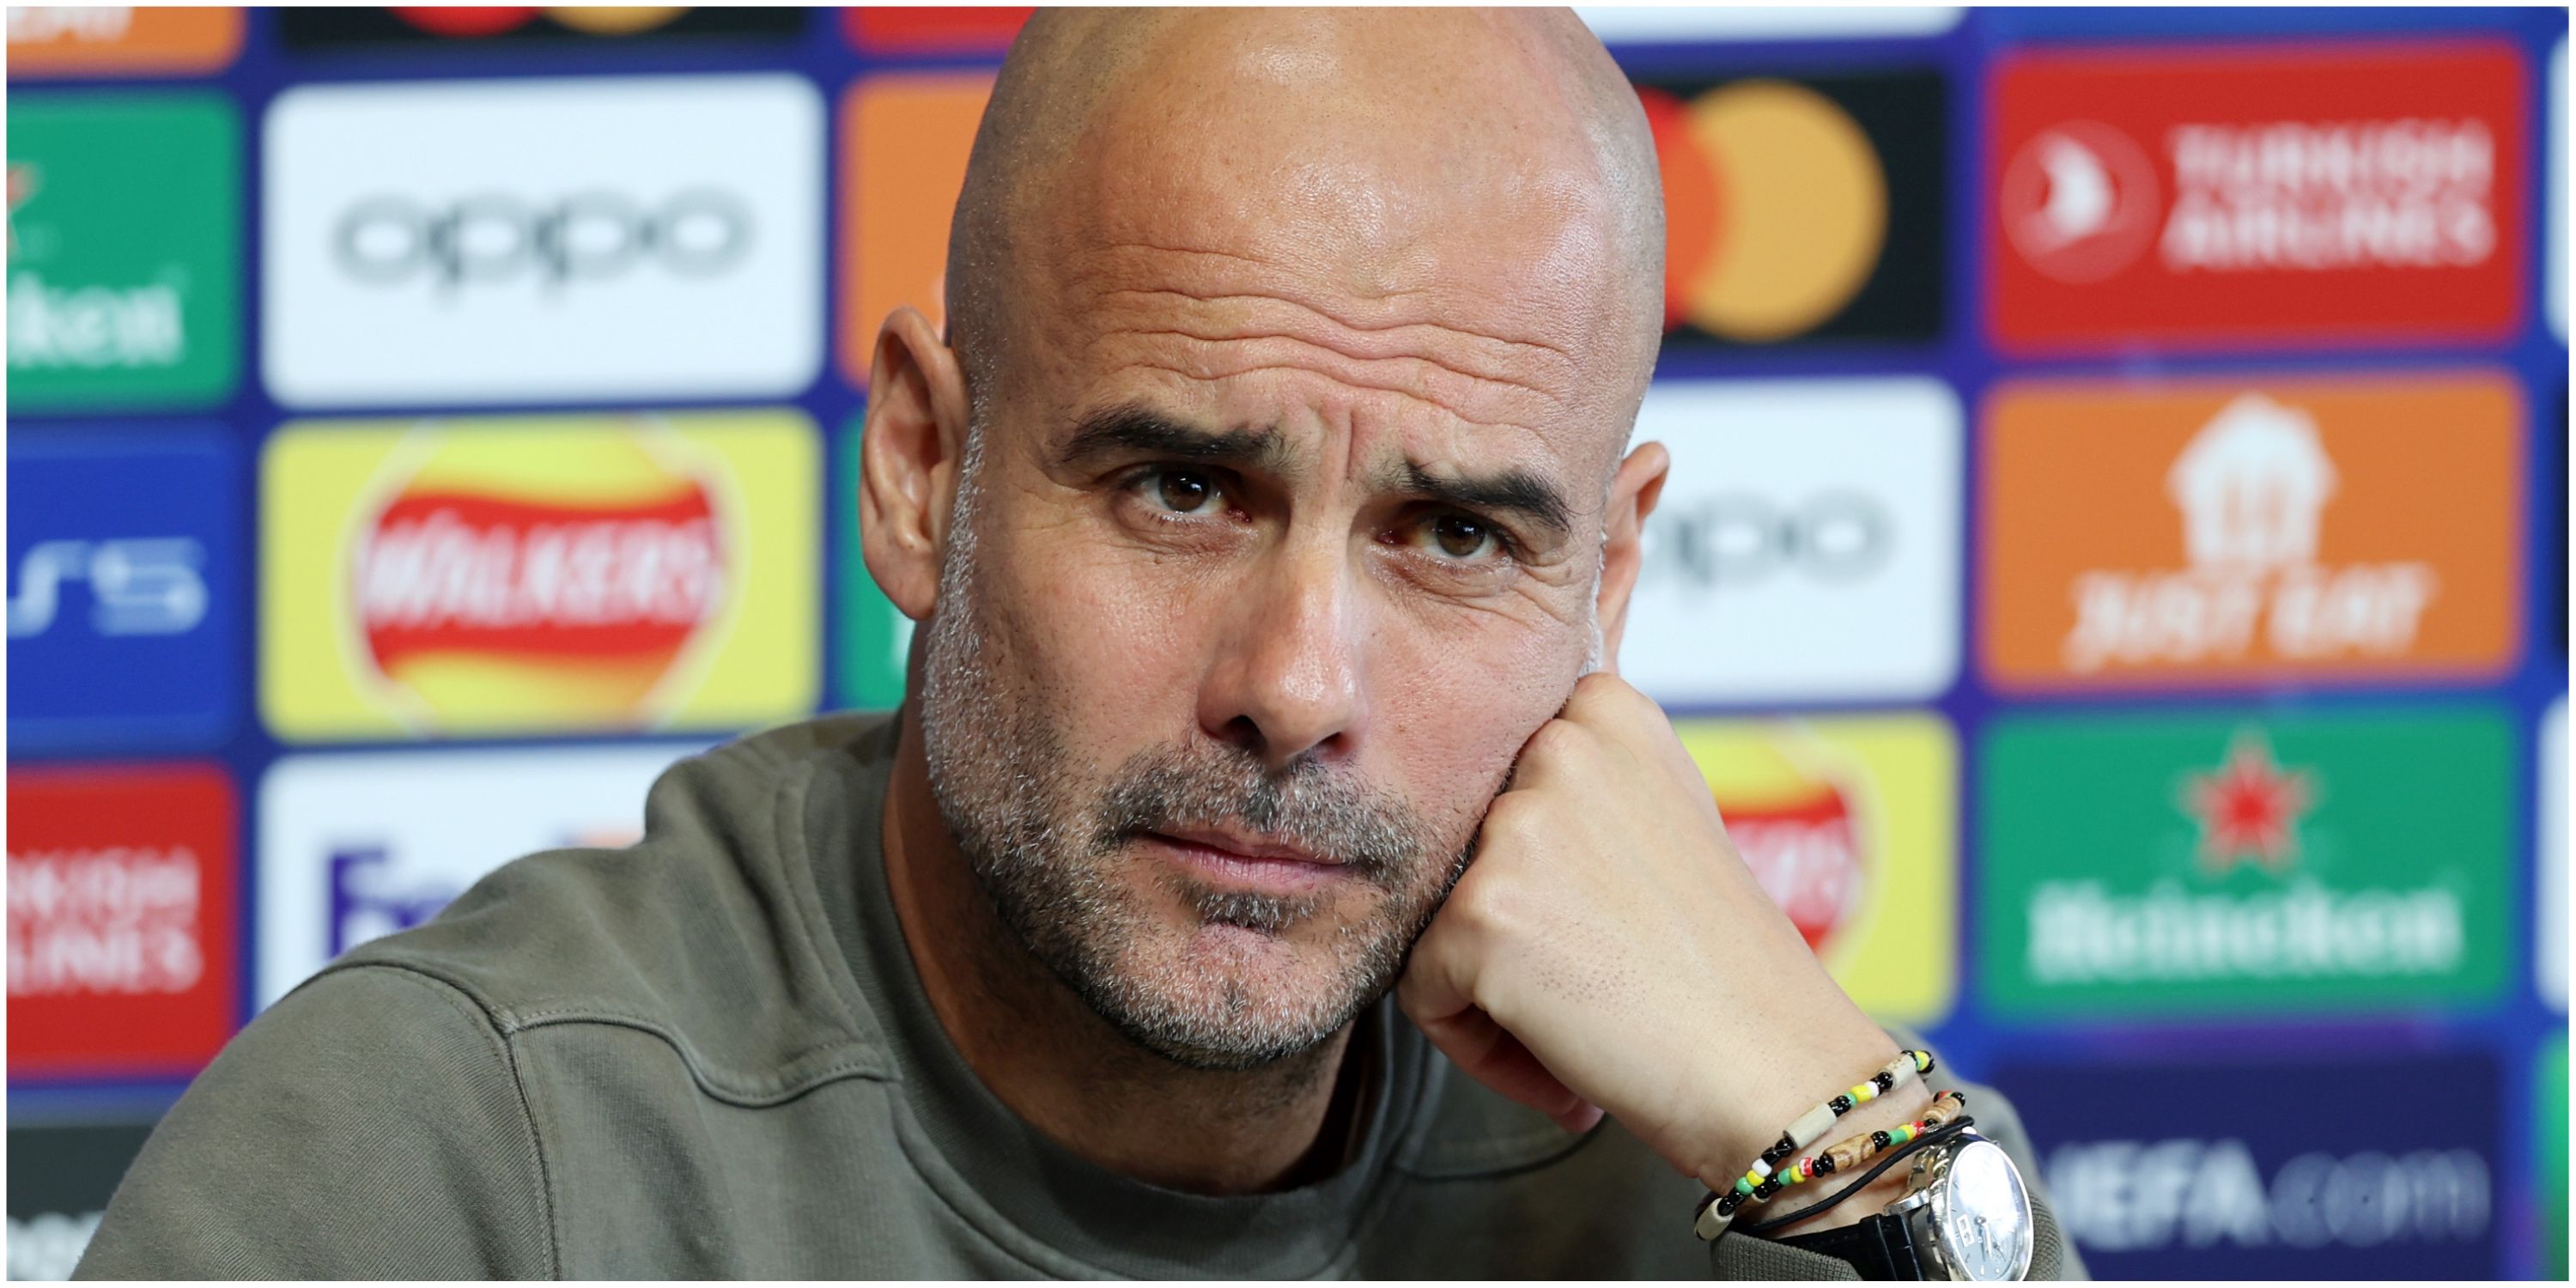 Pep Guardiola roasted for bizarre comment about Man Utd’s 1999 win vs Bayern Munich